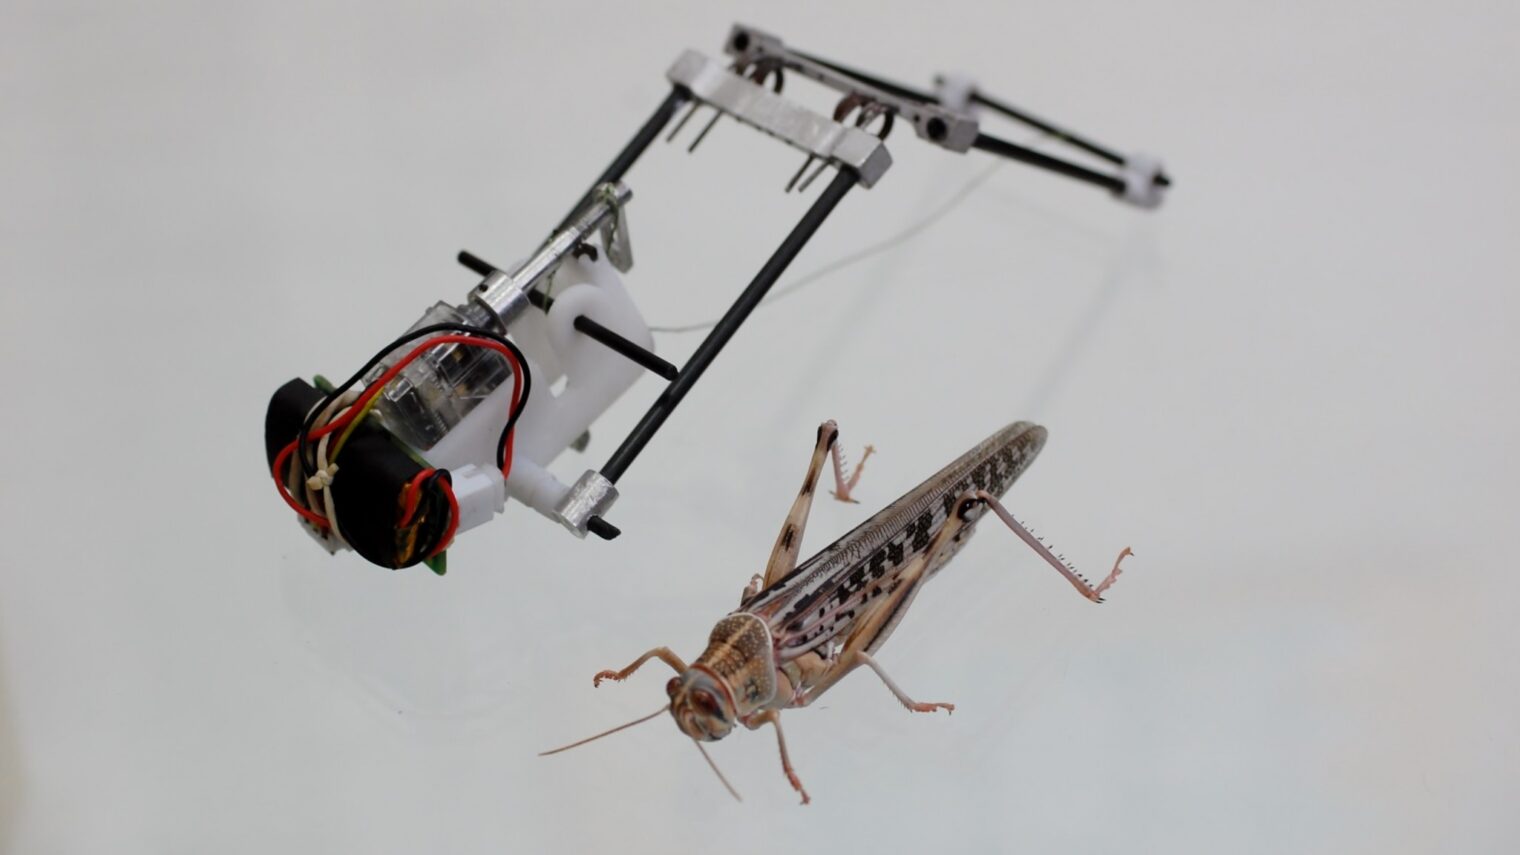 The TAUB robot is modeled after a high-jumping locust. Photo courtesy of American Friends of Tel Aviv University